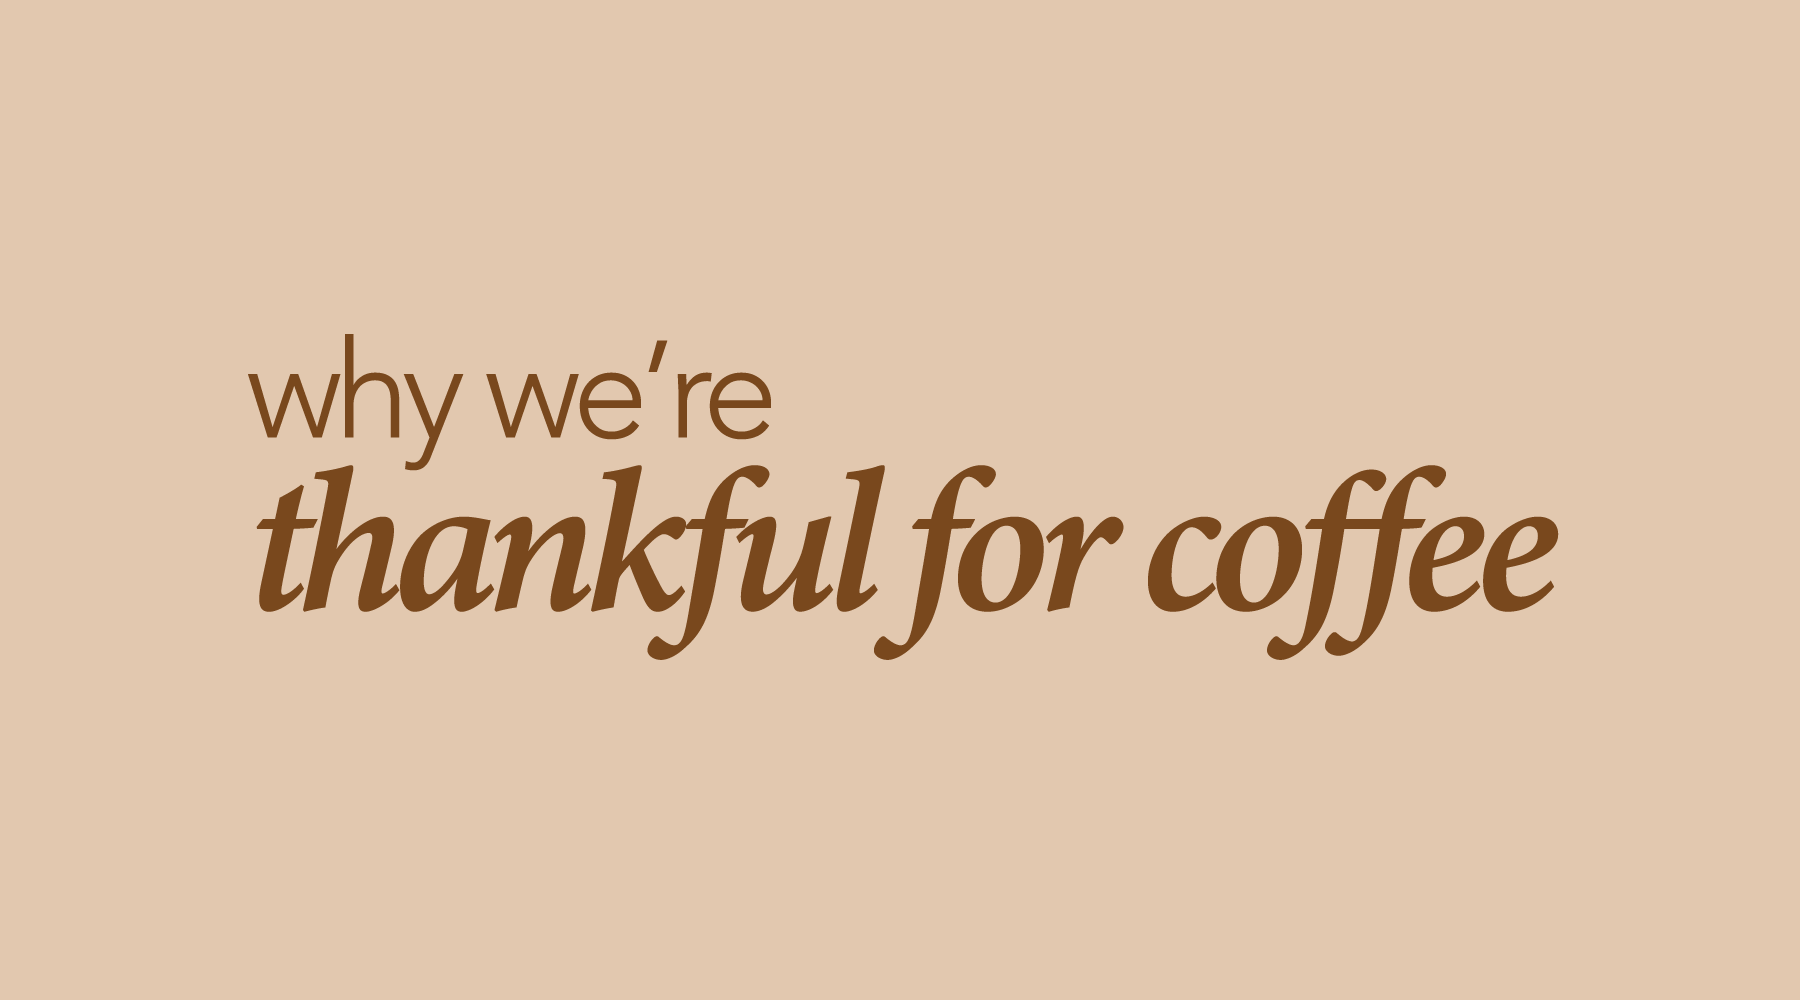 title card for the "why we're thankful for coffee" blog